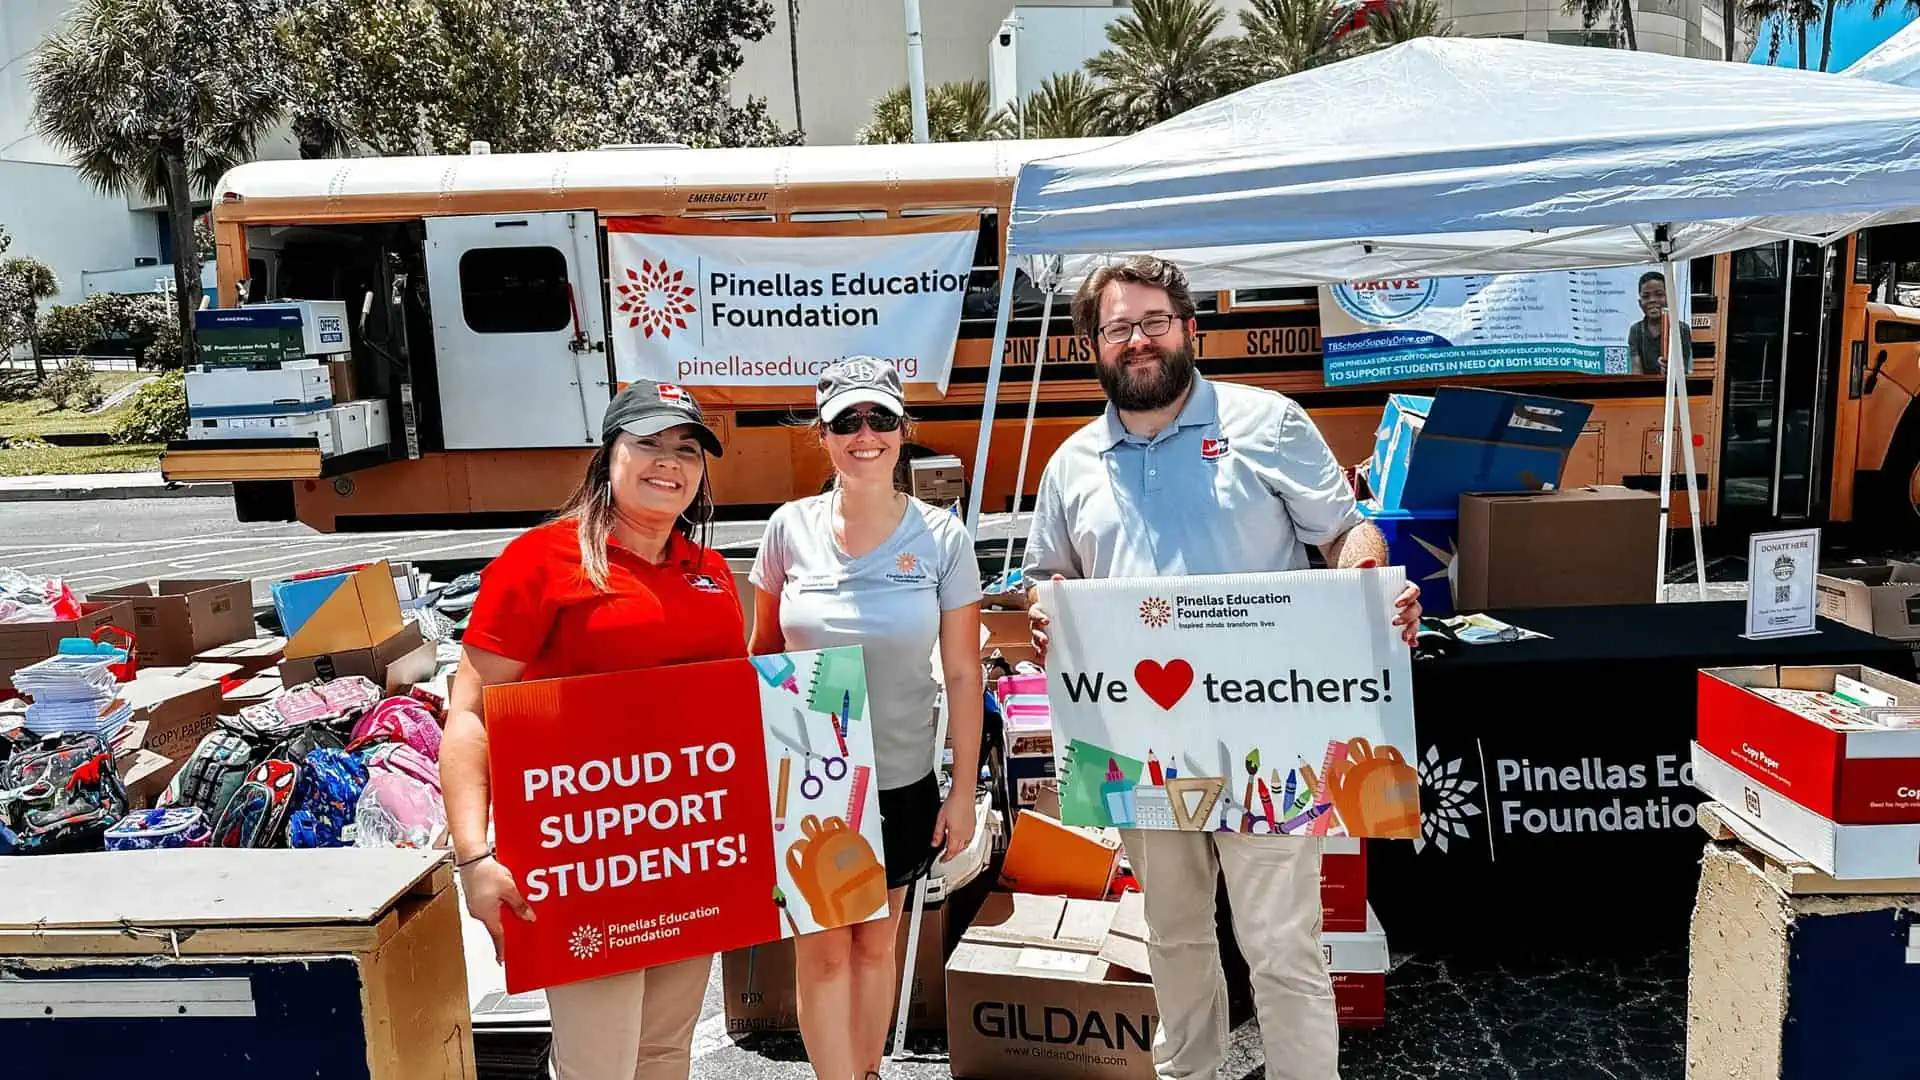 NAA EDU Stuff the Bus Pinellas Education Foundation scaled